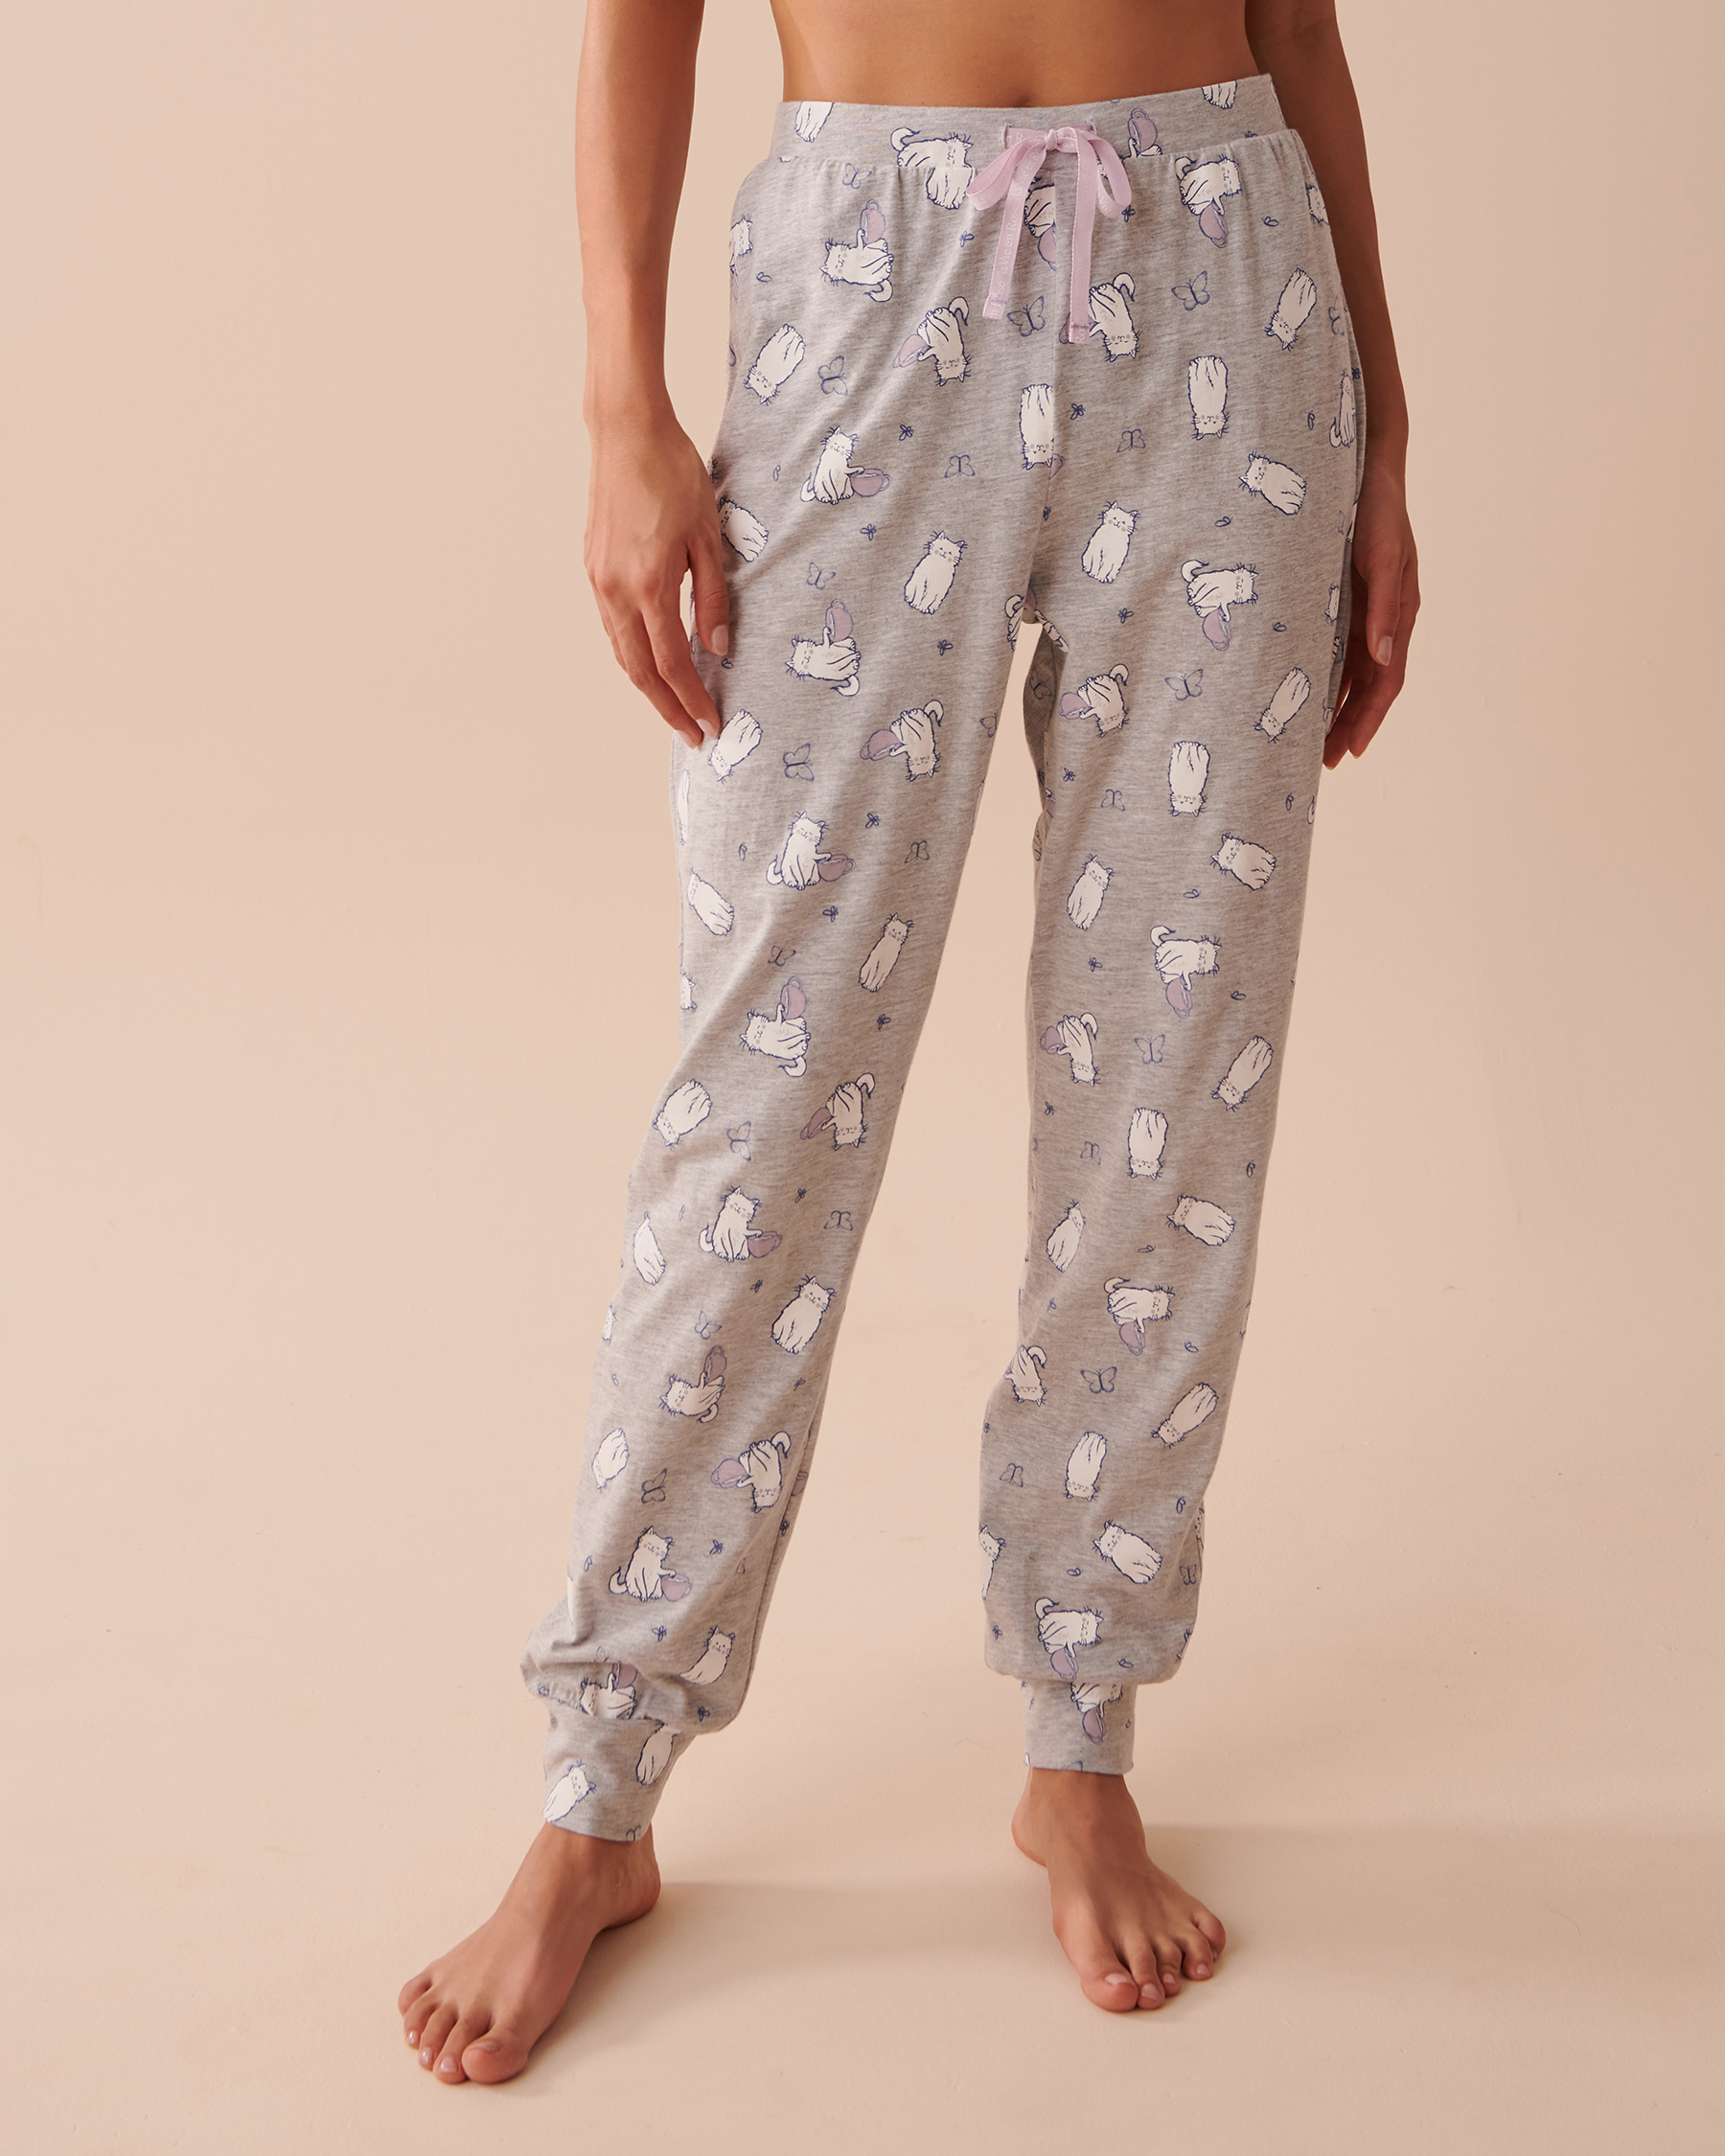 LA VIE EN ROSE Fitted Pajama Pants Cats and Butterflies 40200534 - View1